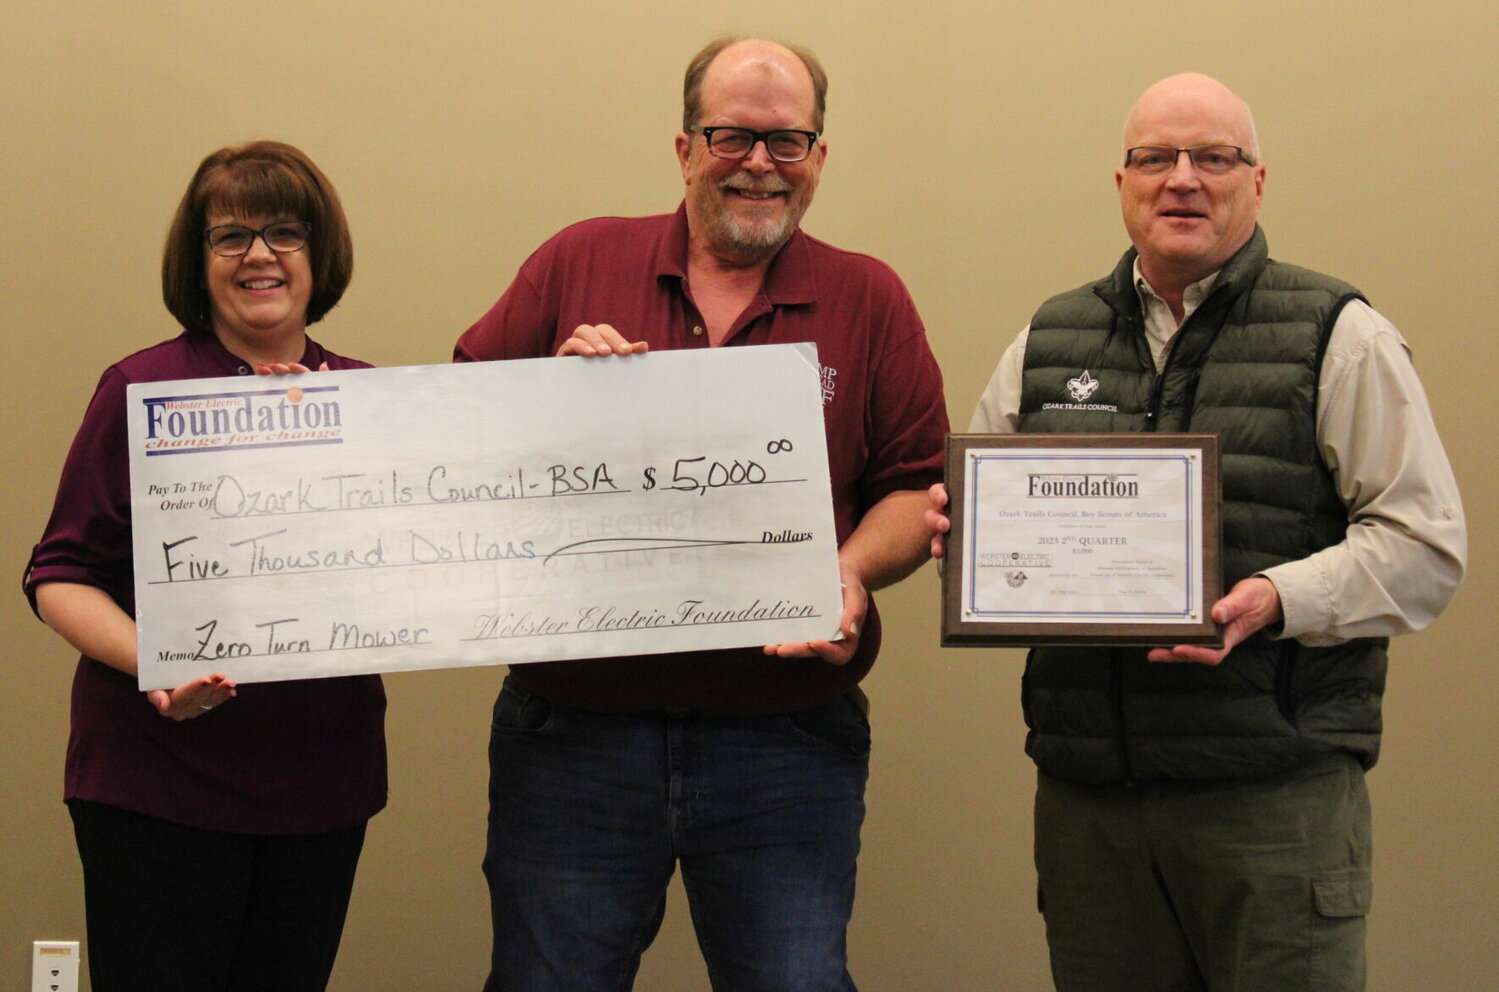 Accepting a grant of $5,000 for the Ozark Trails Council-Boy Scouts of America is Mark Peterman (Left) and John Feick (Right).


They will use the money to purchase a Zero Turn Mower at Camp Arrowhead.